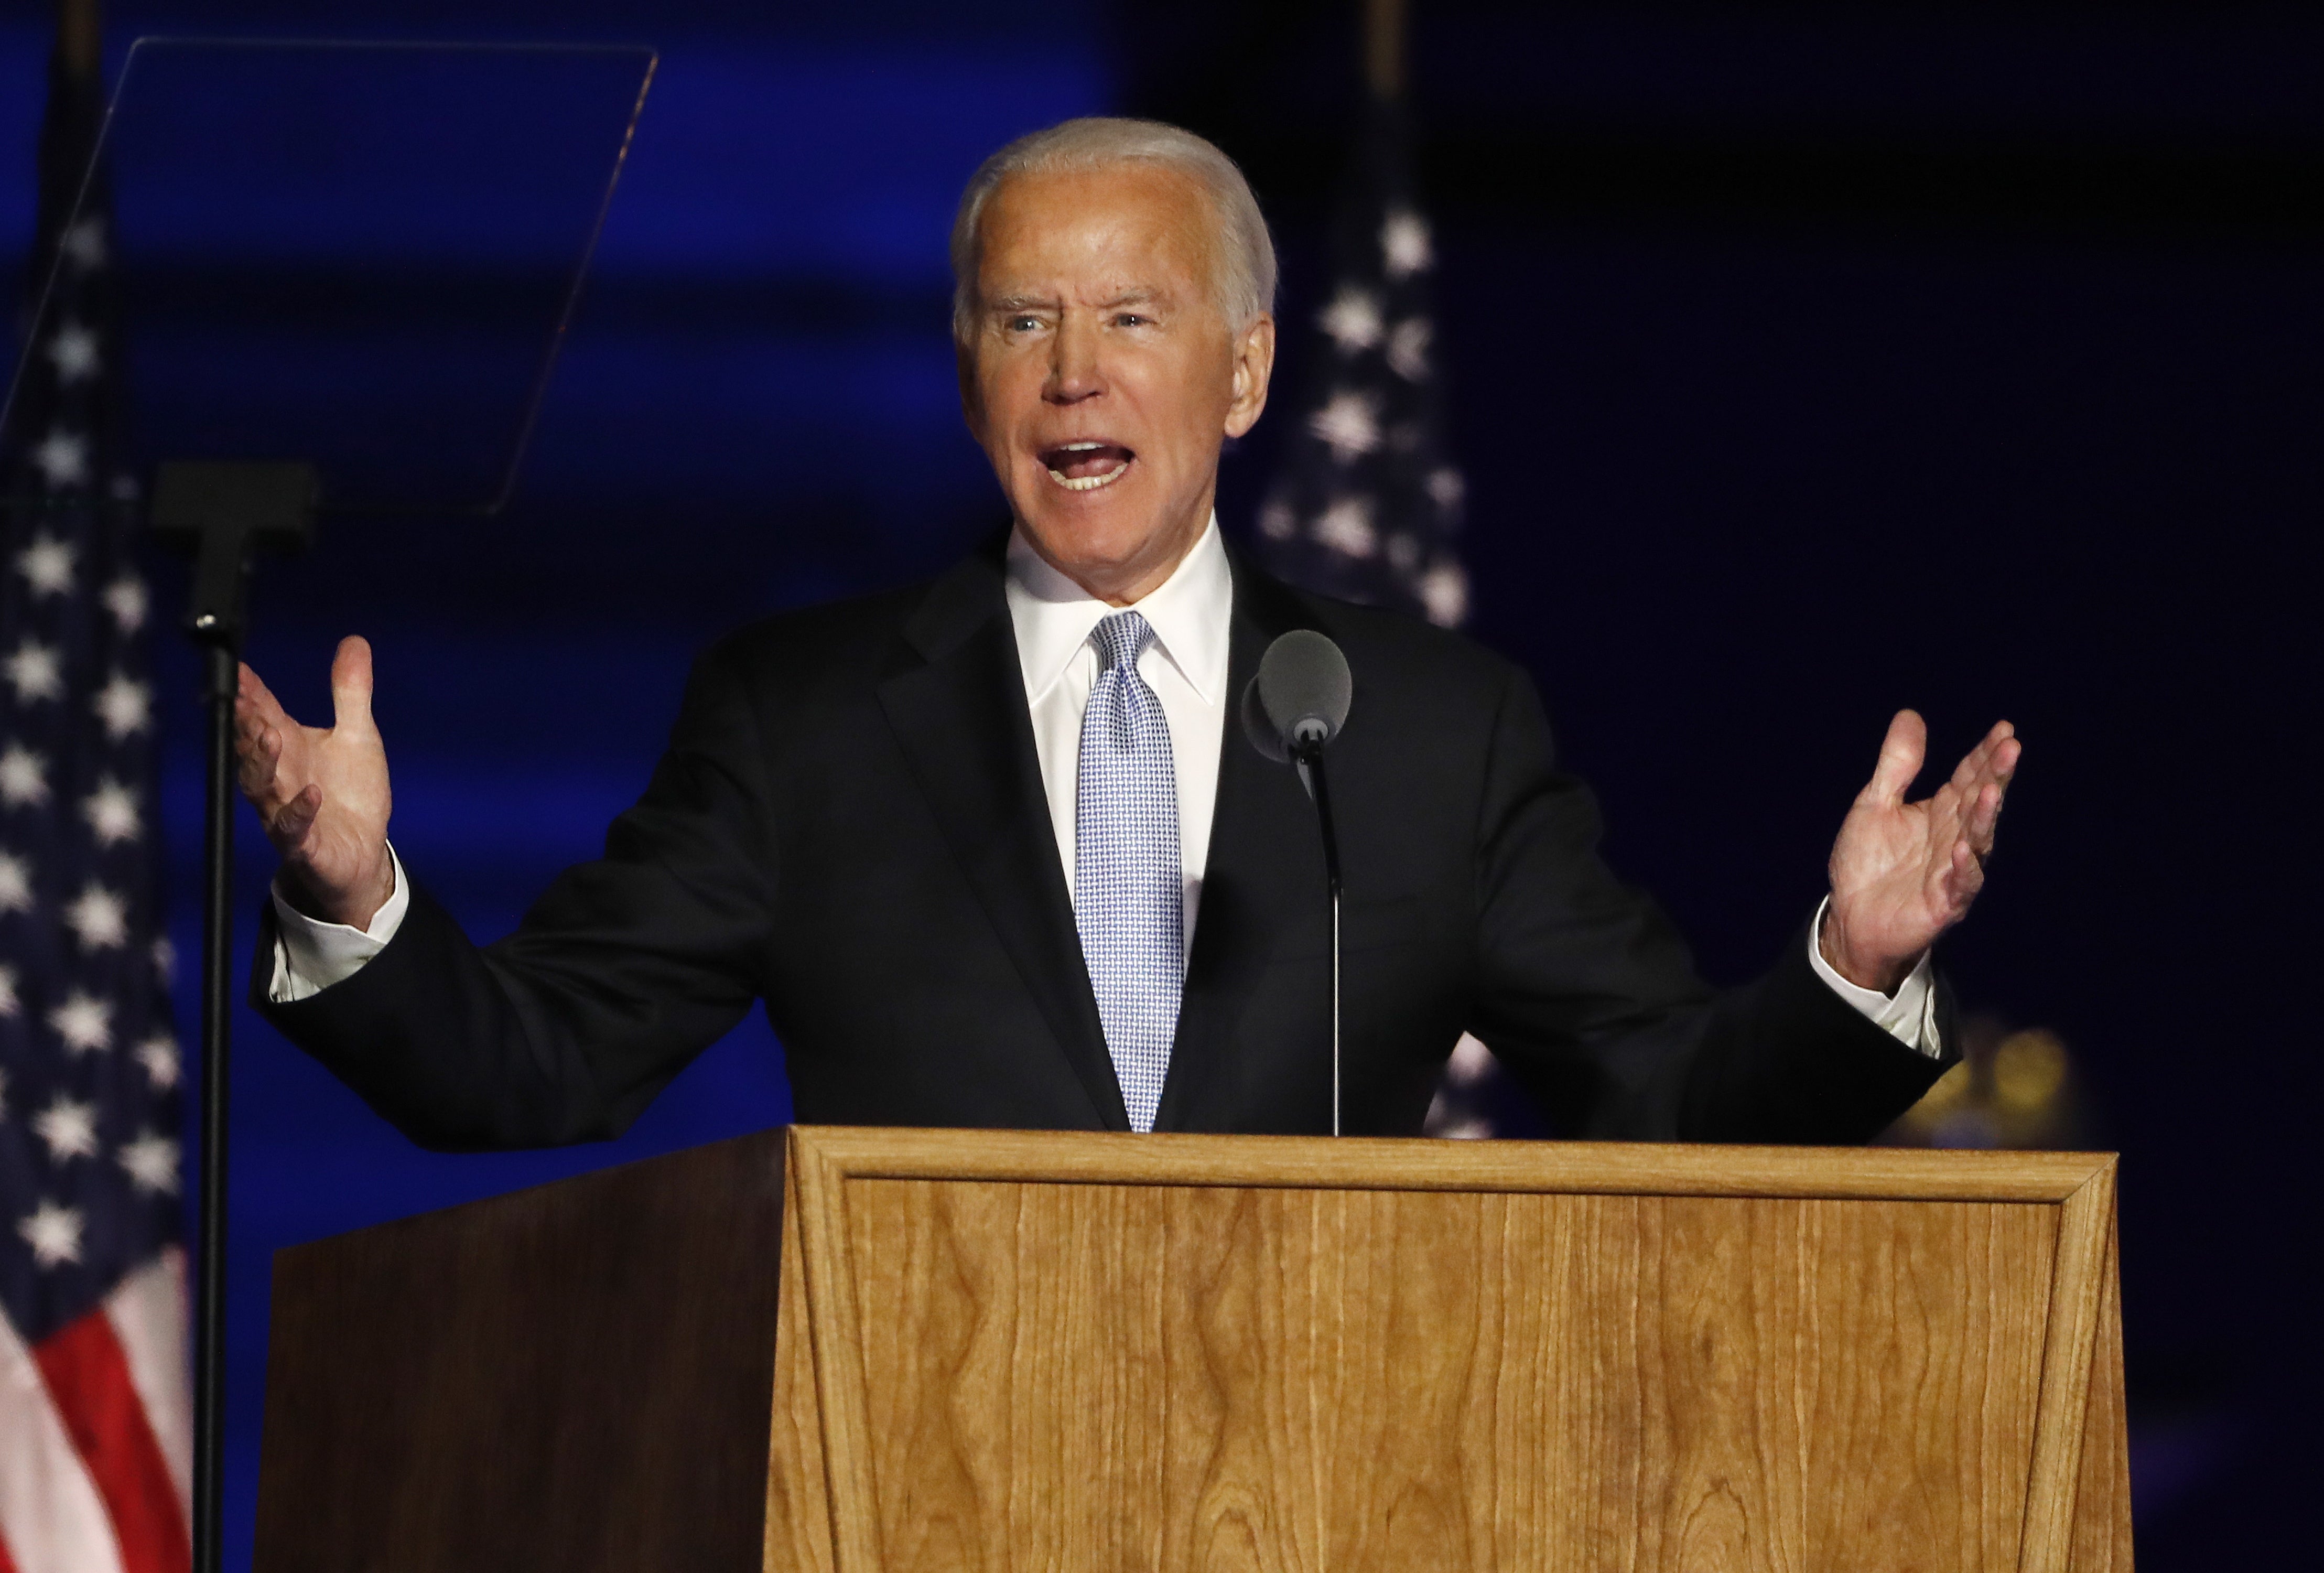 Biden’s election is seen as ‘the biggest moment for climate change in 2020’